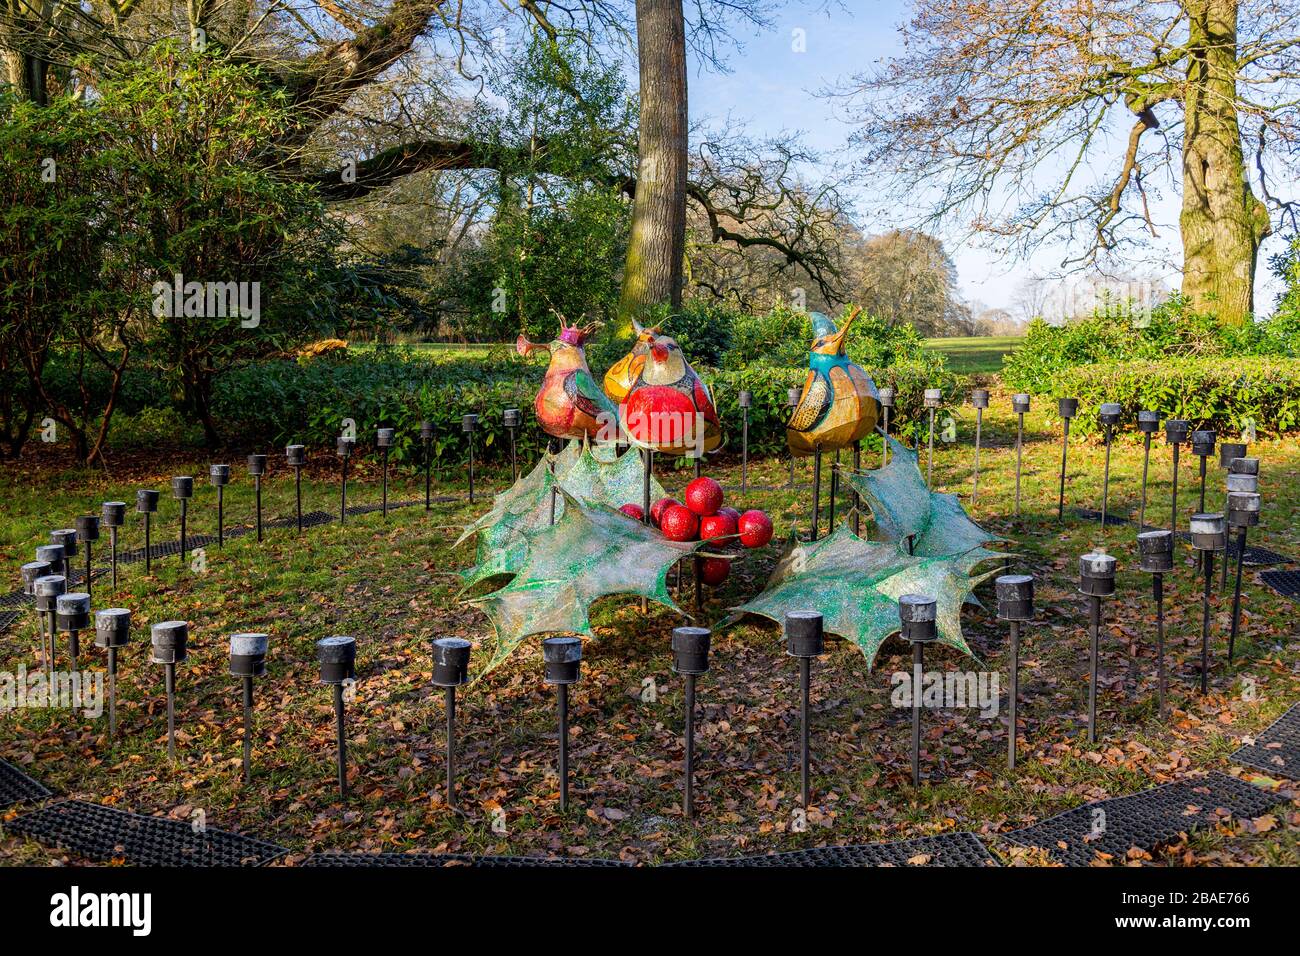 A 'Four Calling Birds' winter artwork in the grounds of Stourhead House as part of their Christmas attractions, Wiltshire, England, UK Stock Photo